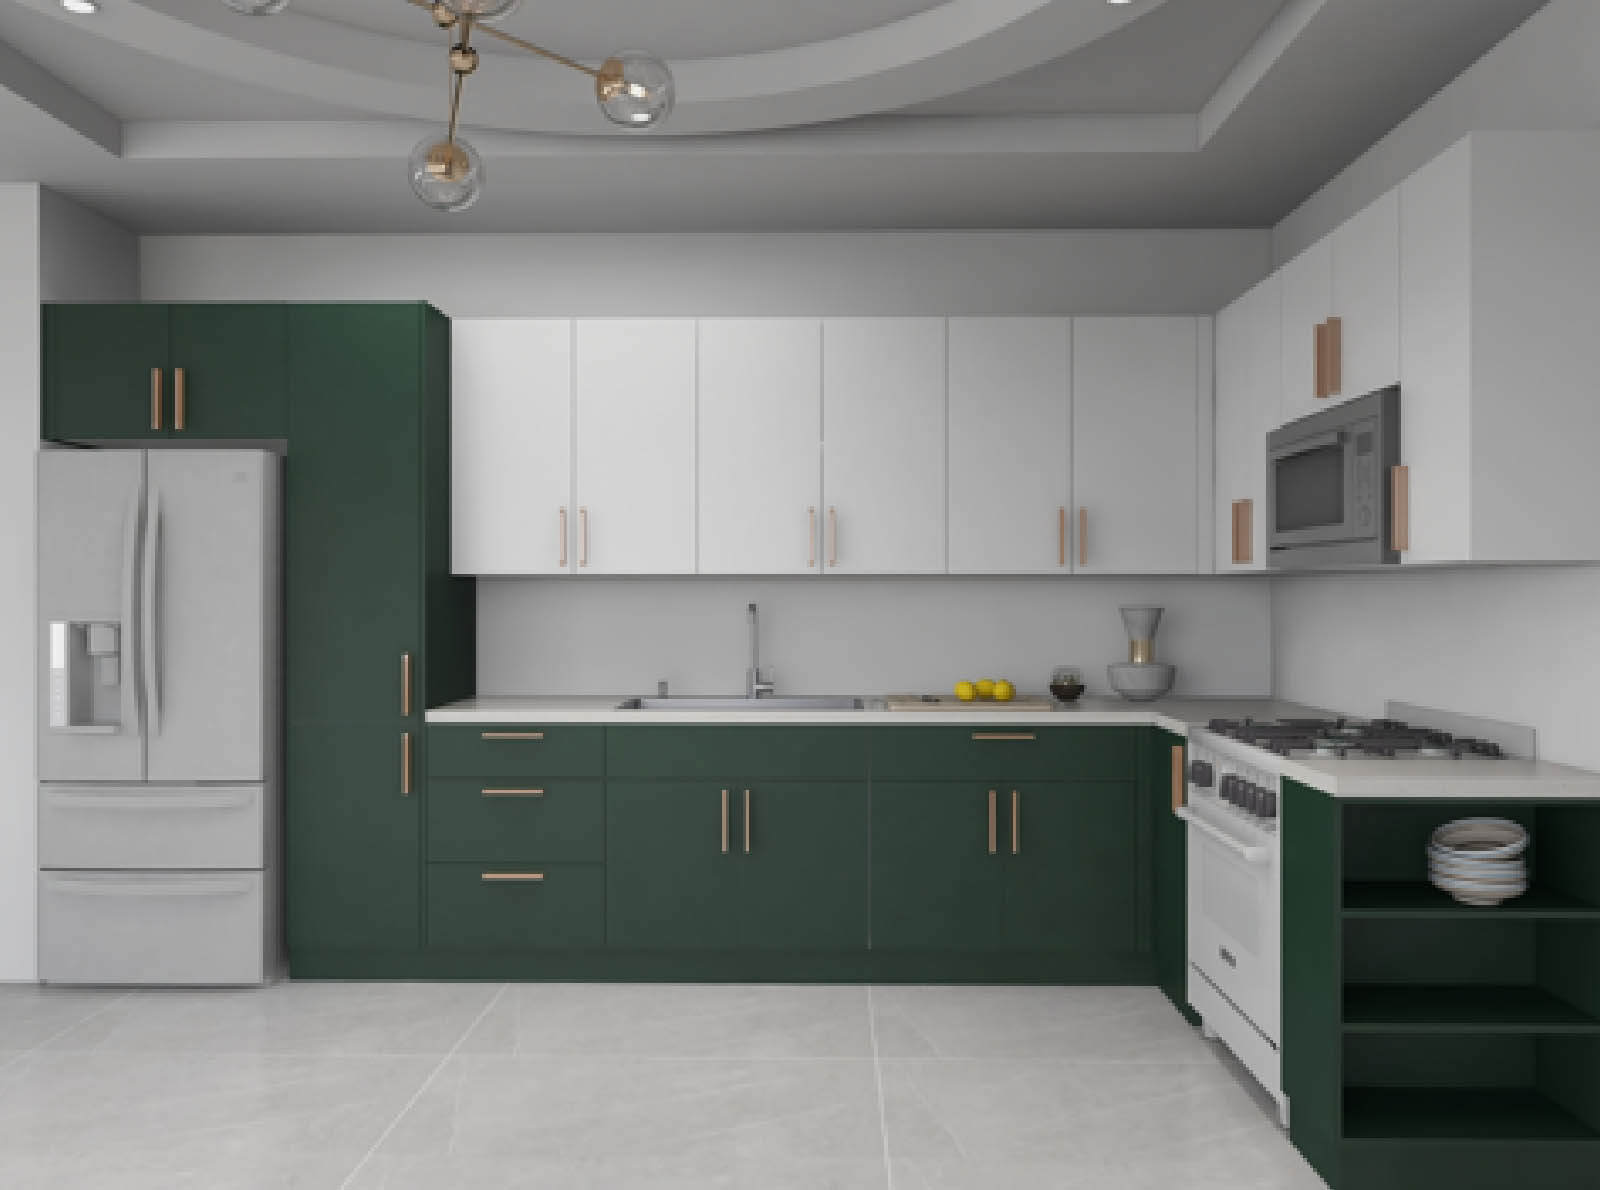 Render of the apartment kitchen in the Laureate apartments